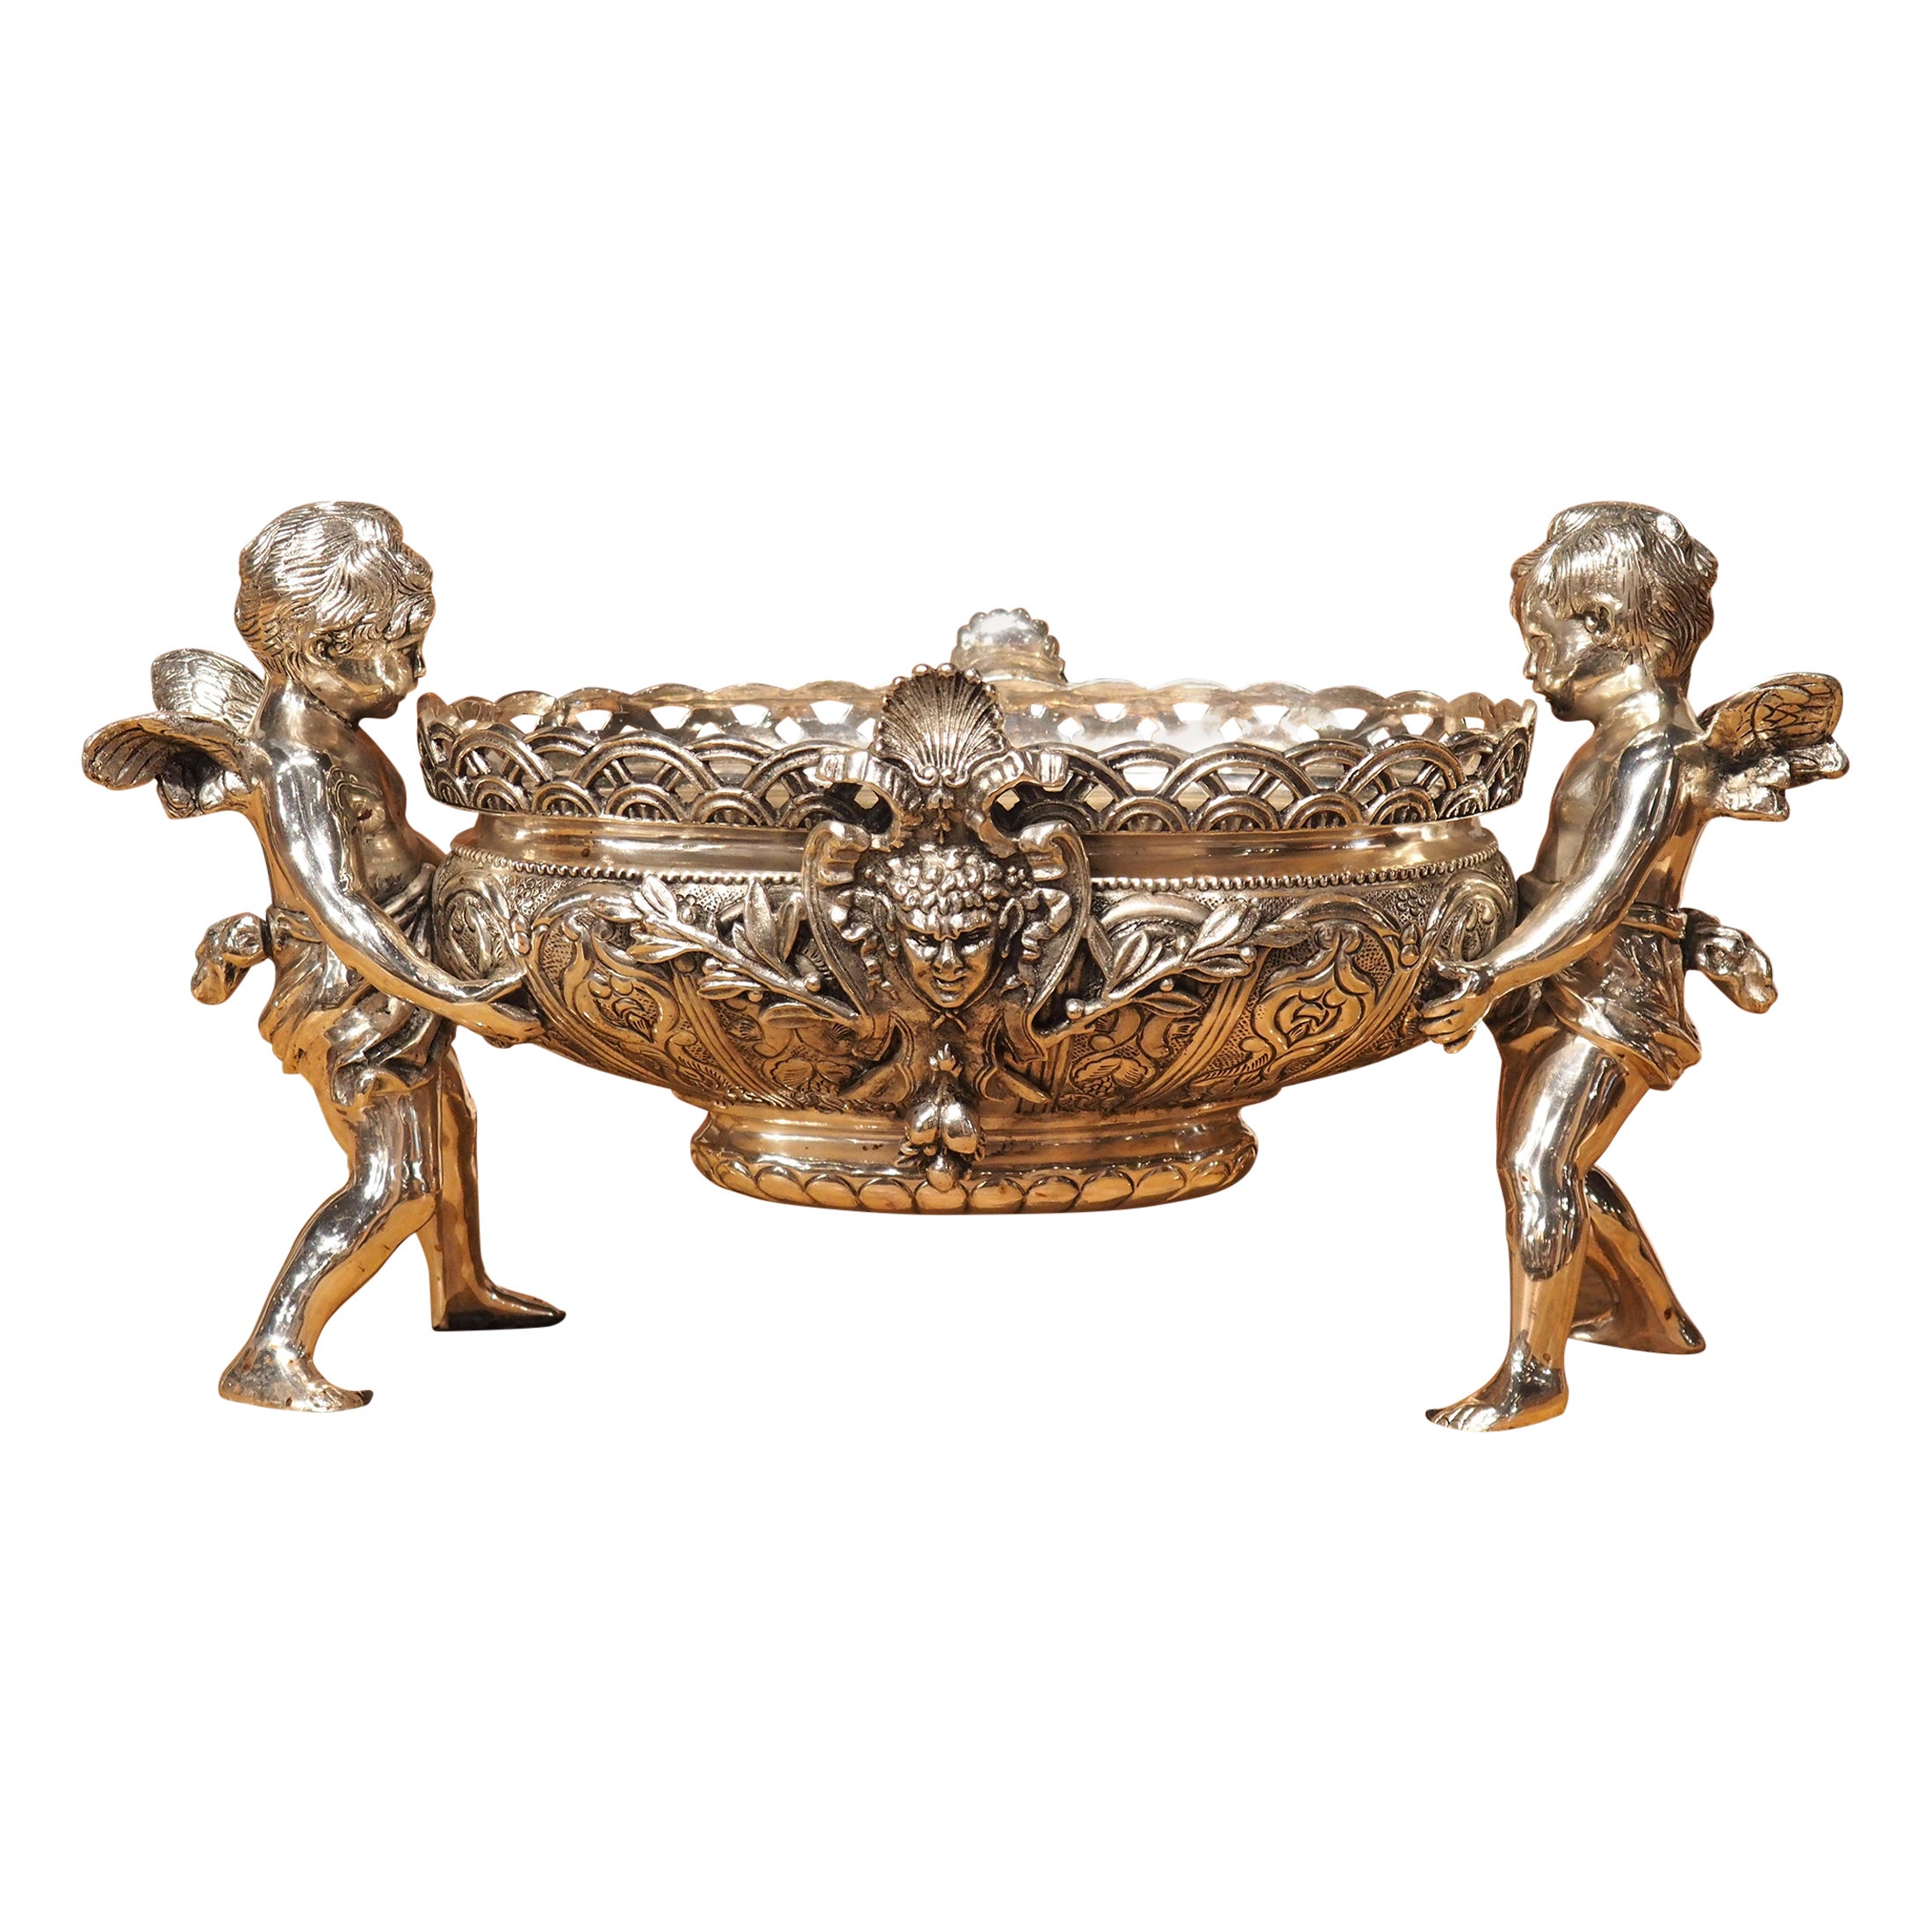 French Louis XV Style Silvered Bronze Jardiniere, Putti Supports, Early 20th C.